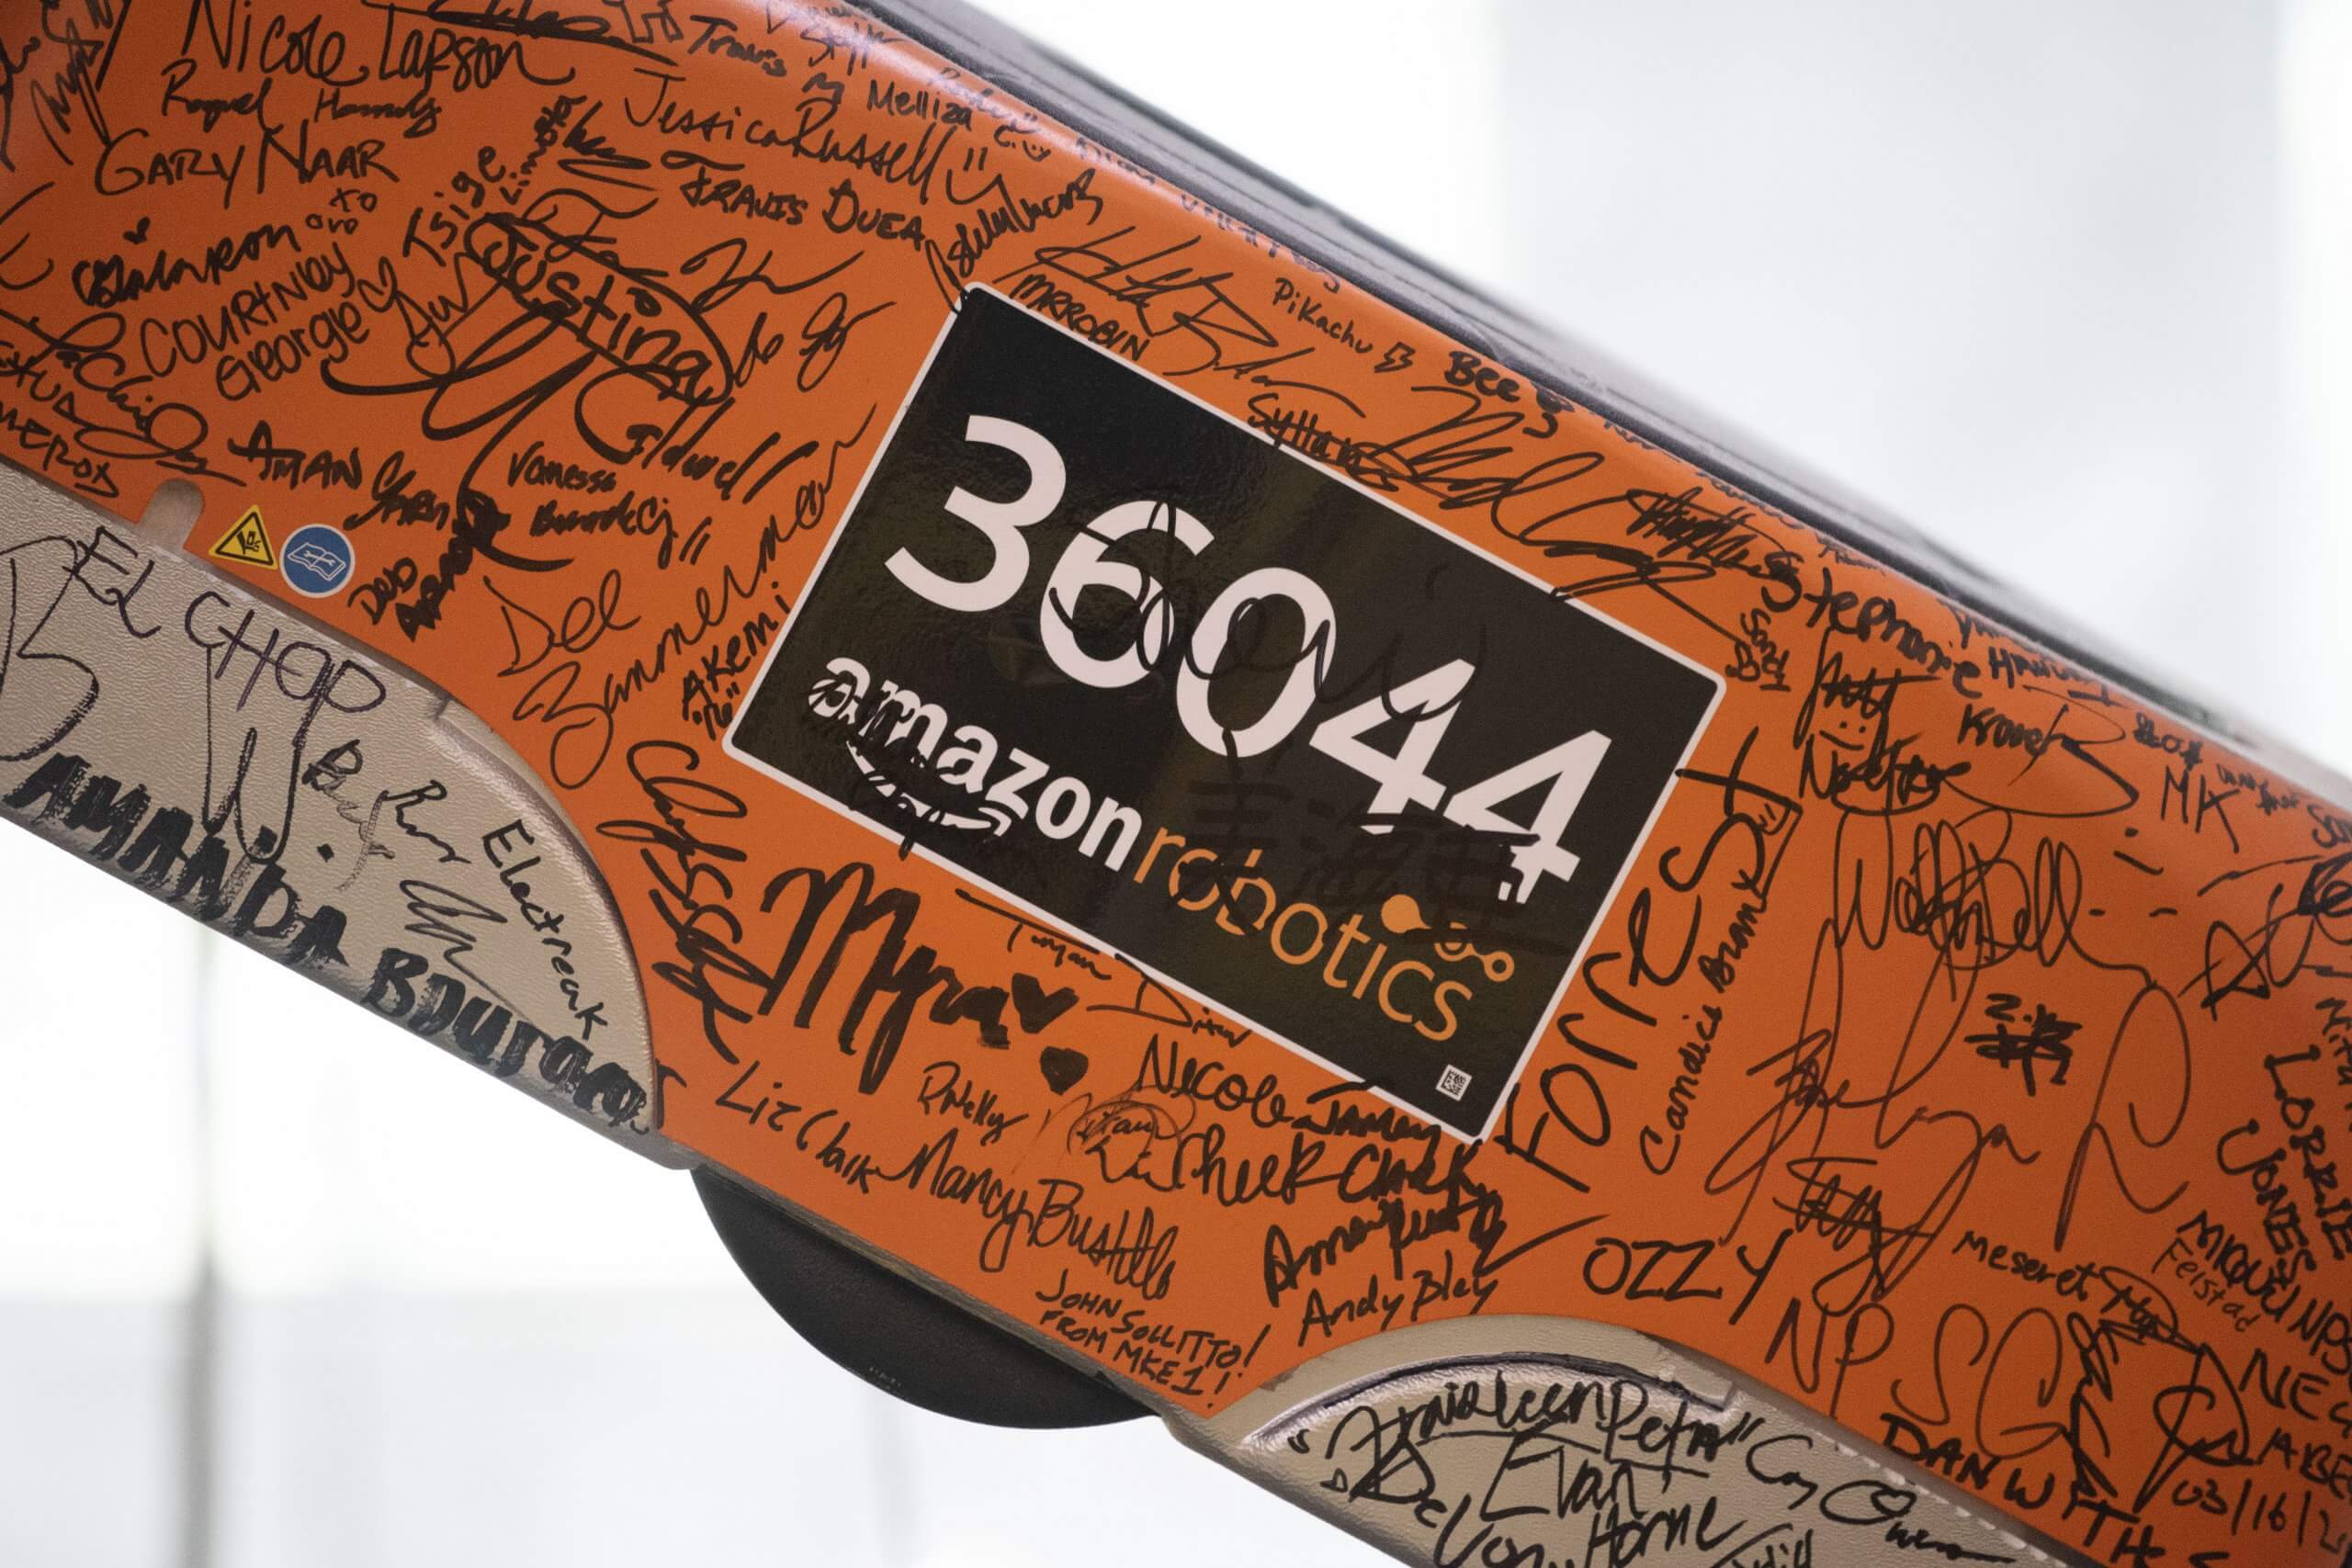 Amazon Robotics works, signed by the entire staff on the opening day of the Kent, Washington Fulfillment Center in March of 2016, hangs over the entrance during a tour September 21, 2018 in Kent, Washington.